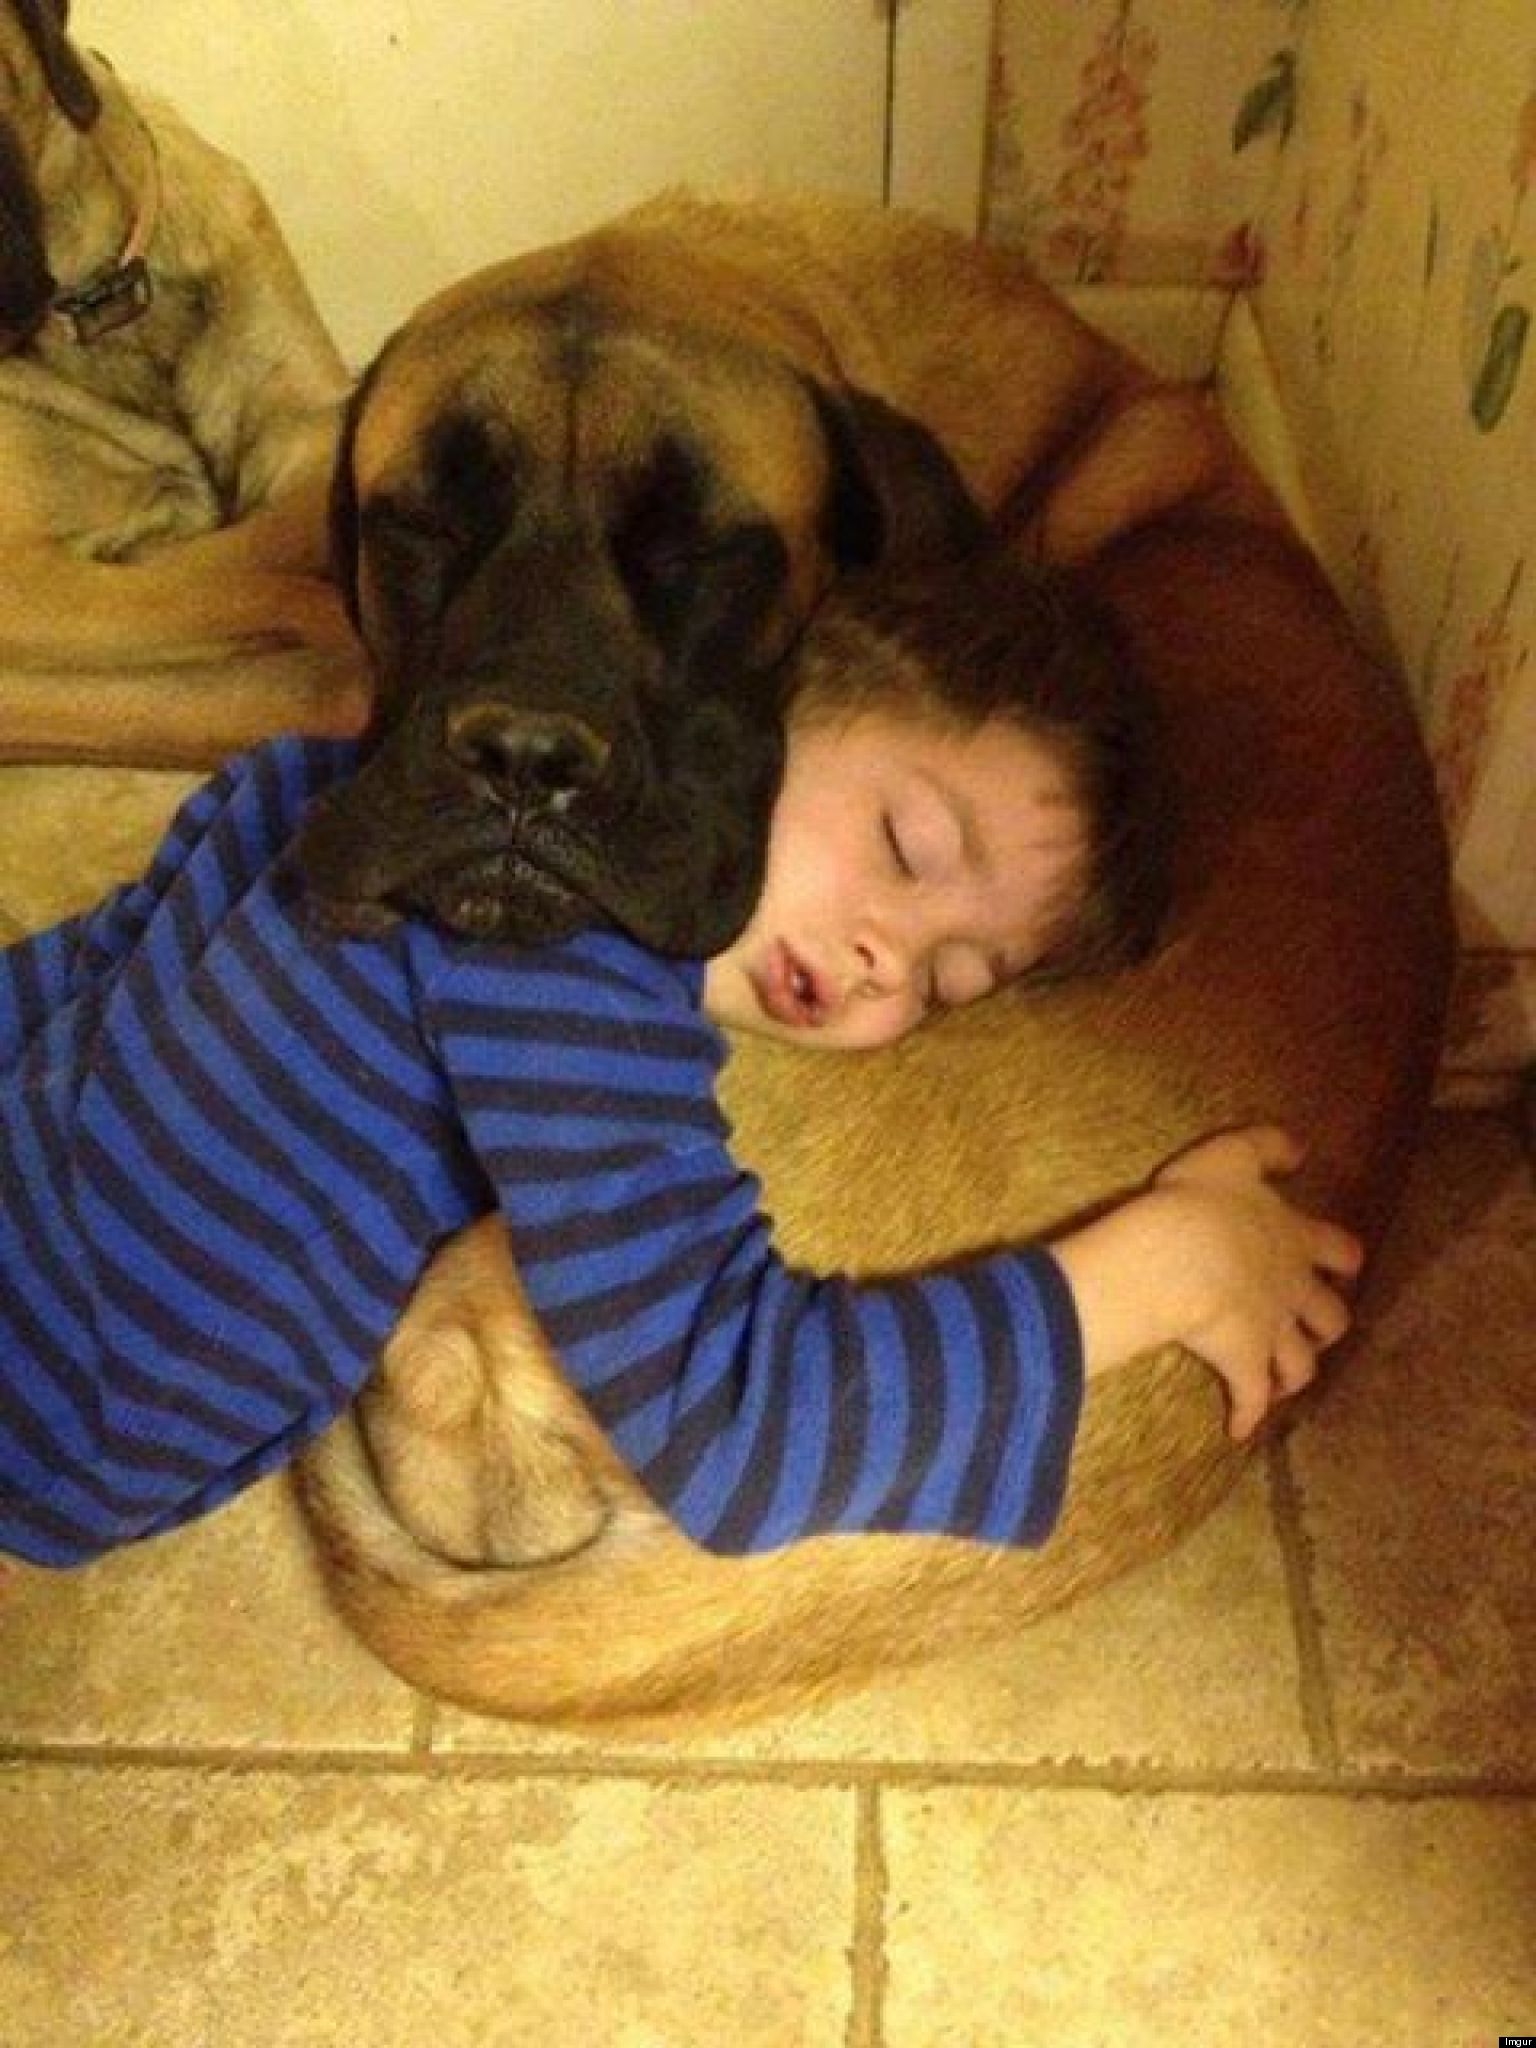 Kids Can Sleep Tight Knowing Their Dog Friend Watches